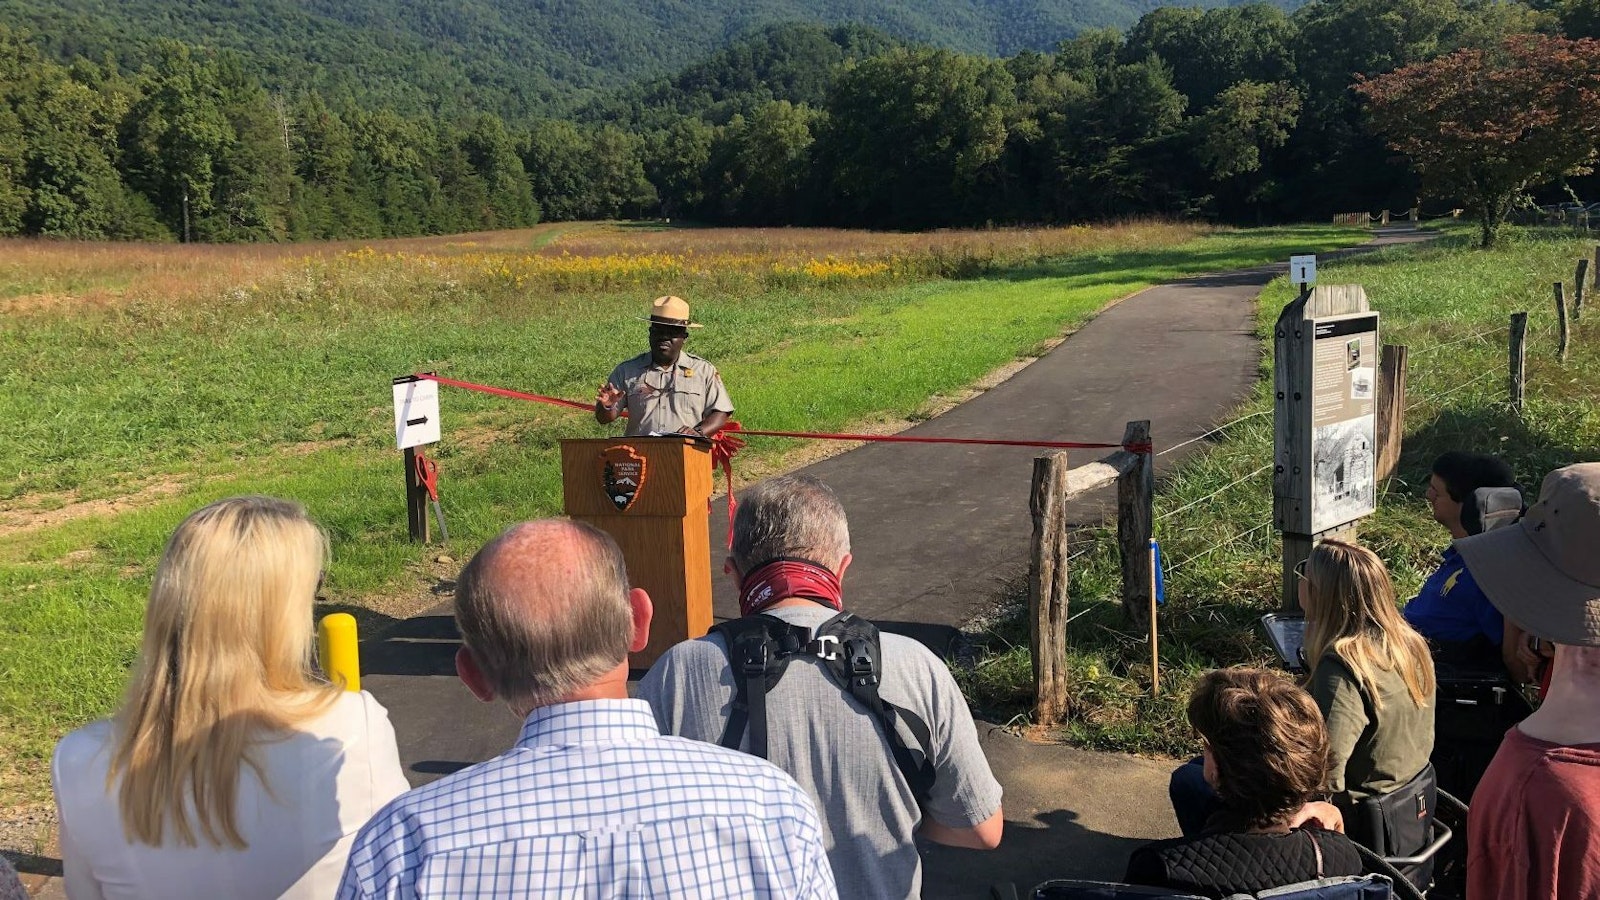 A group of people gather to listen to a person speak from behind a lectern, in front of a paved trail